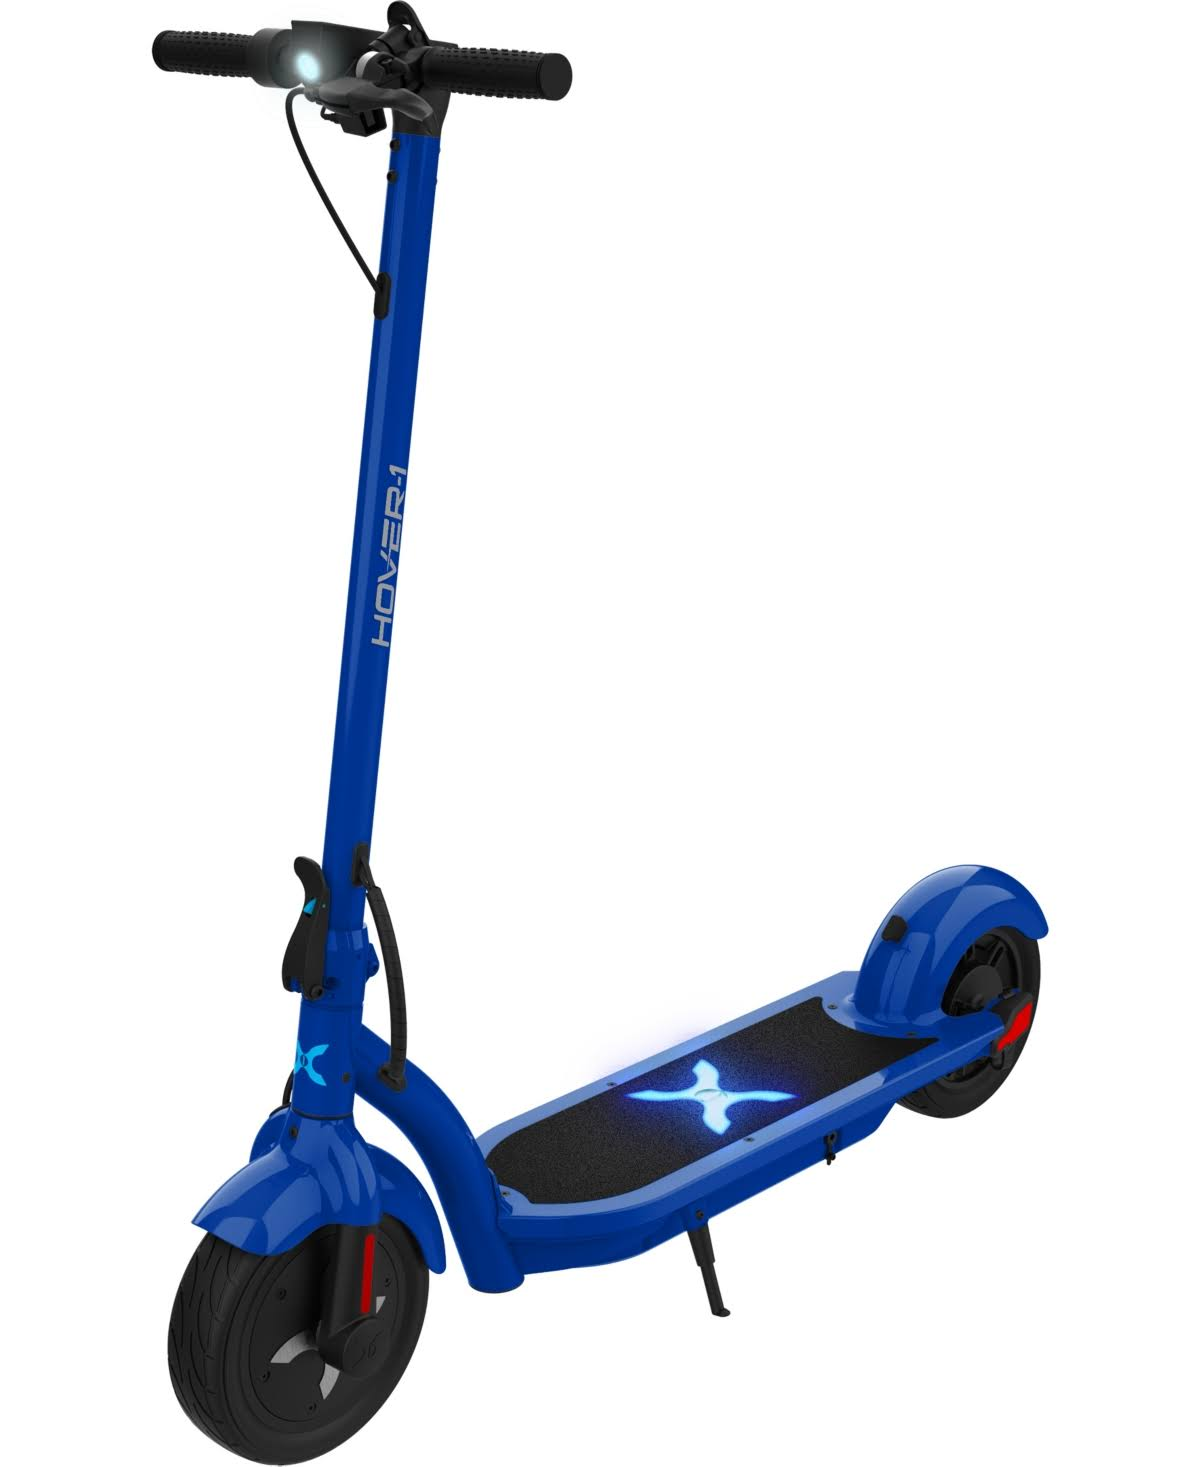 Hover-1 Alpha Electric Scooter, Blue, 264 lbs. Max Weight, LED Lights